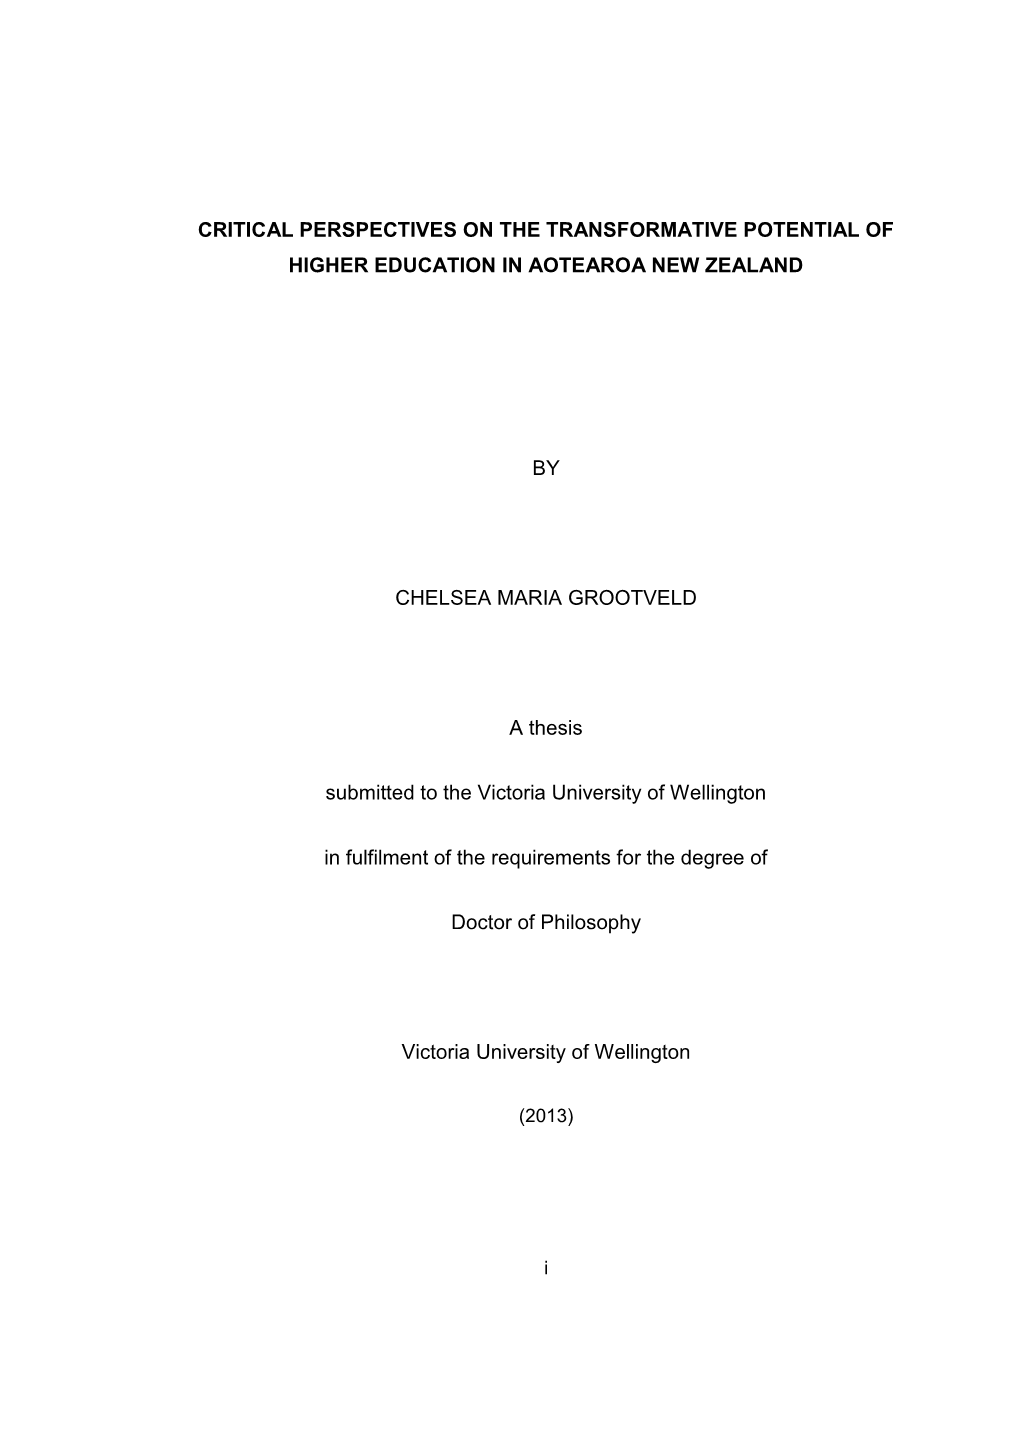 Critical Perspectives on the Transformative Potential of Higher Education in Aotearoa New Zealand by Chelsea Maria Grootveld A